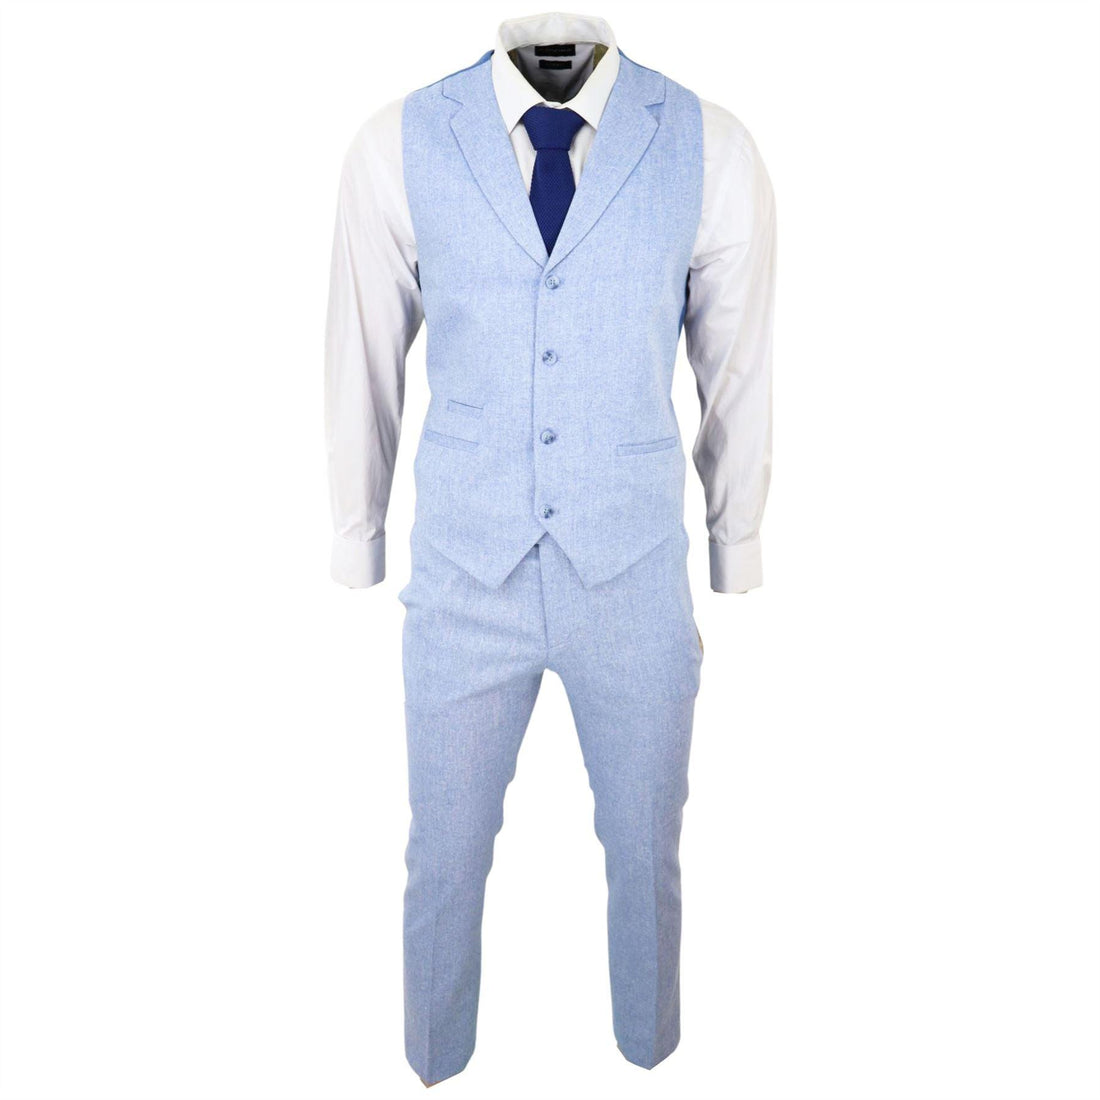 Mens Summer Suit Waistcoat Trousers Linen Smart Formal Baby Blue Wedding - Knighthood Store